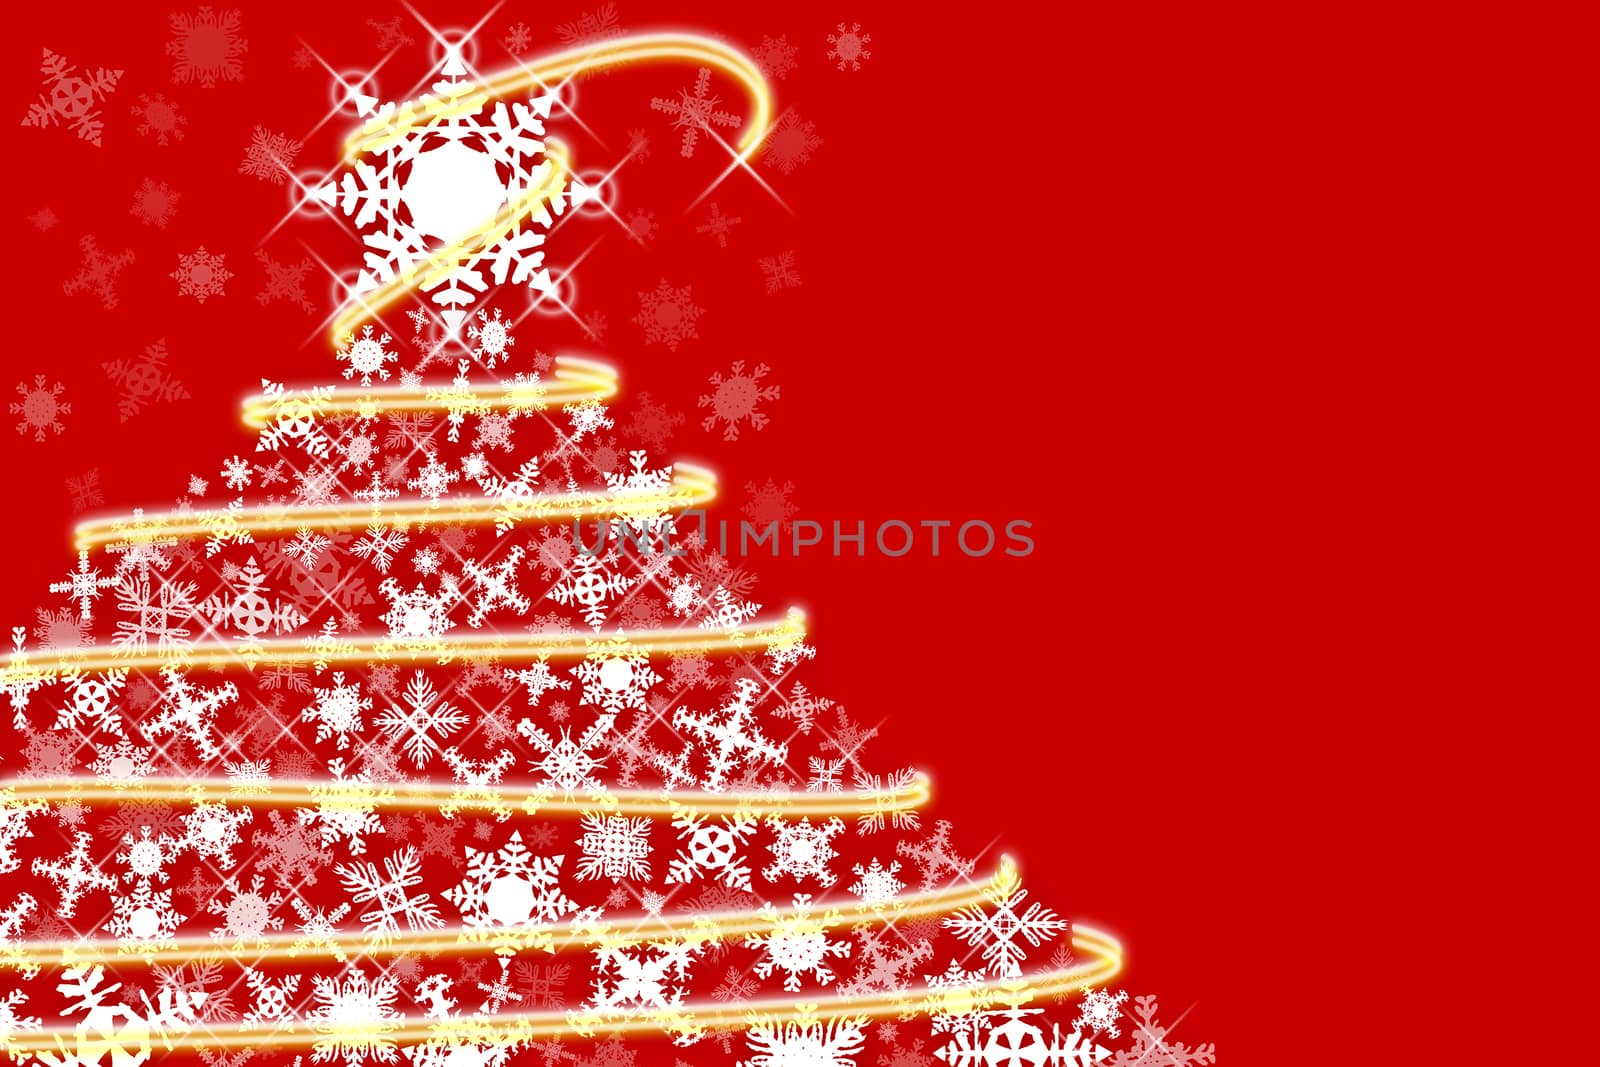 Red and white snowflake christmas tree by photosampler